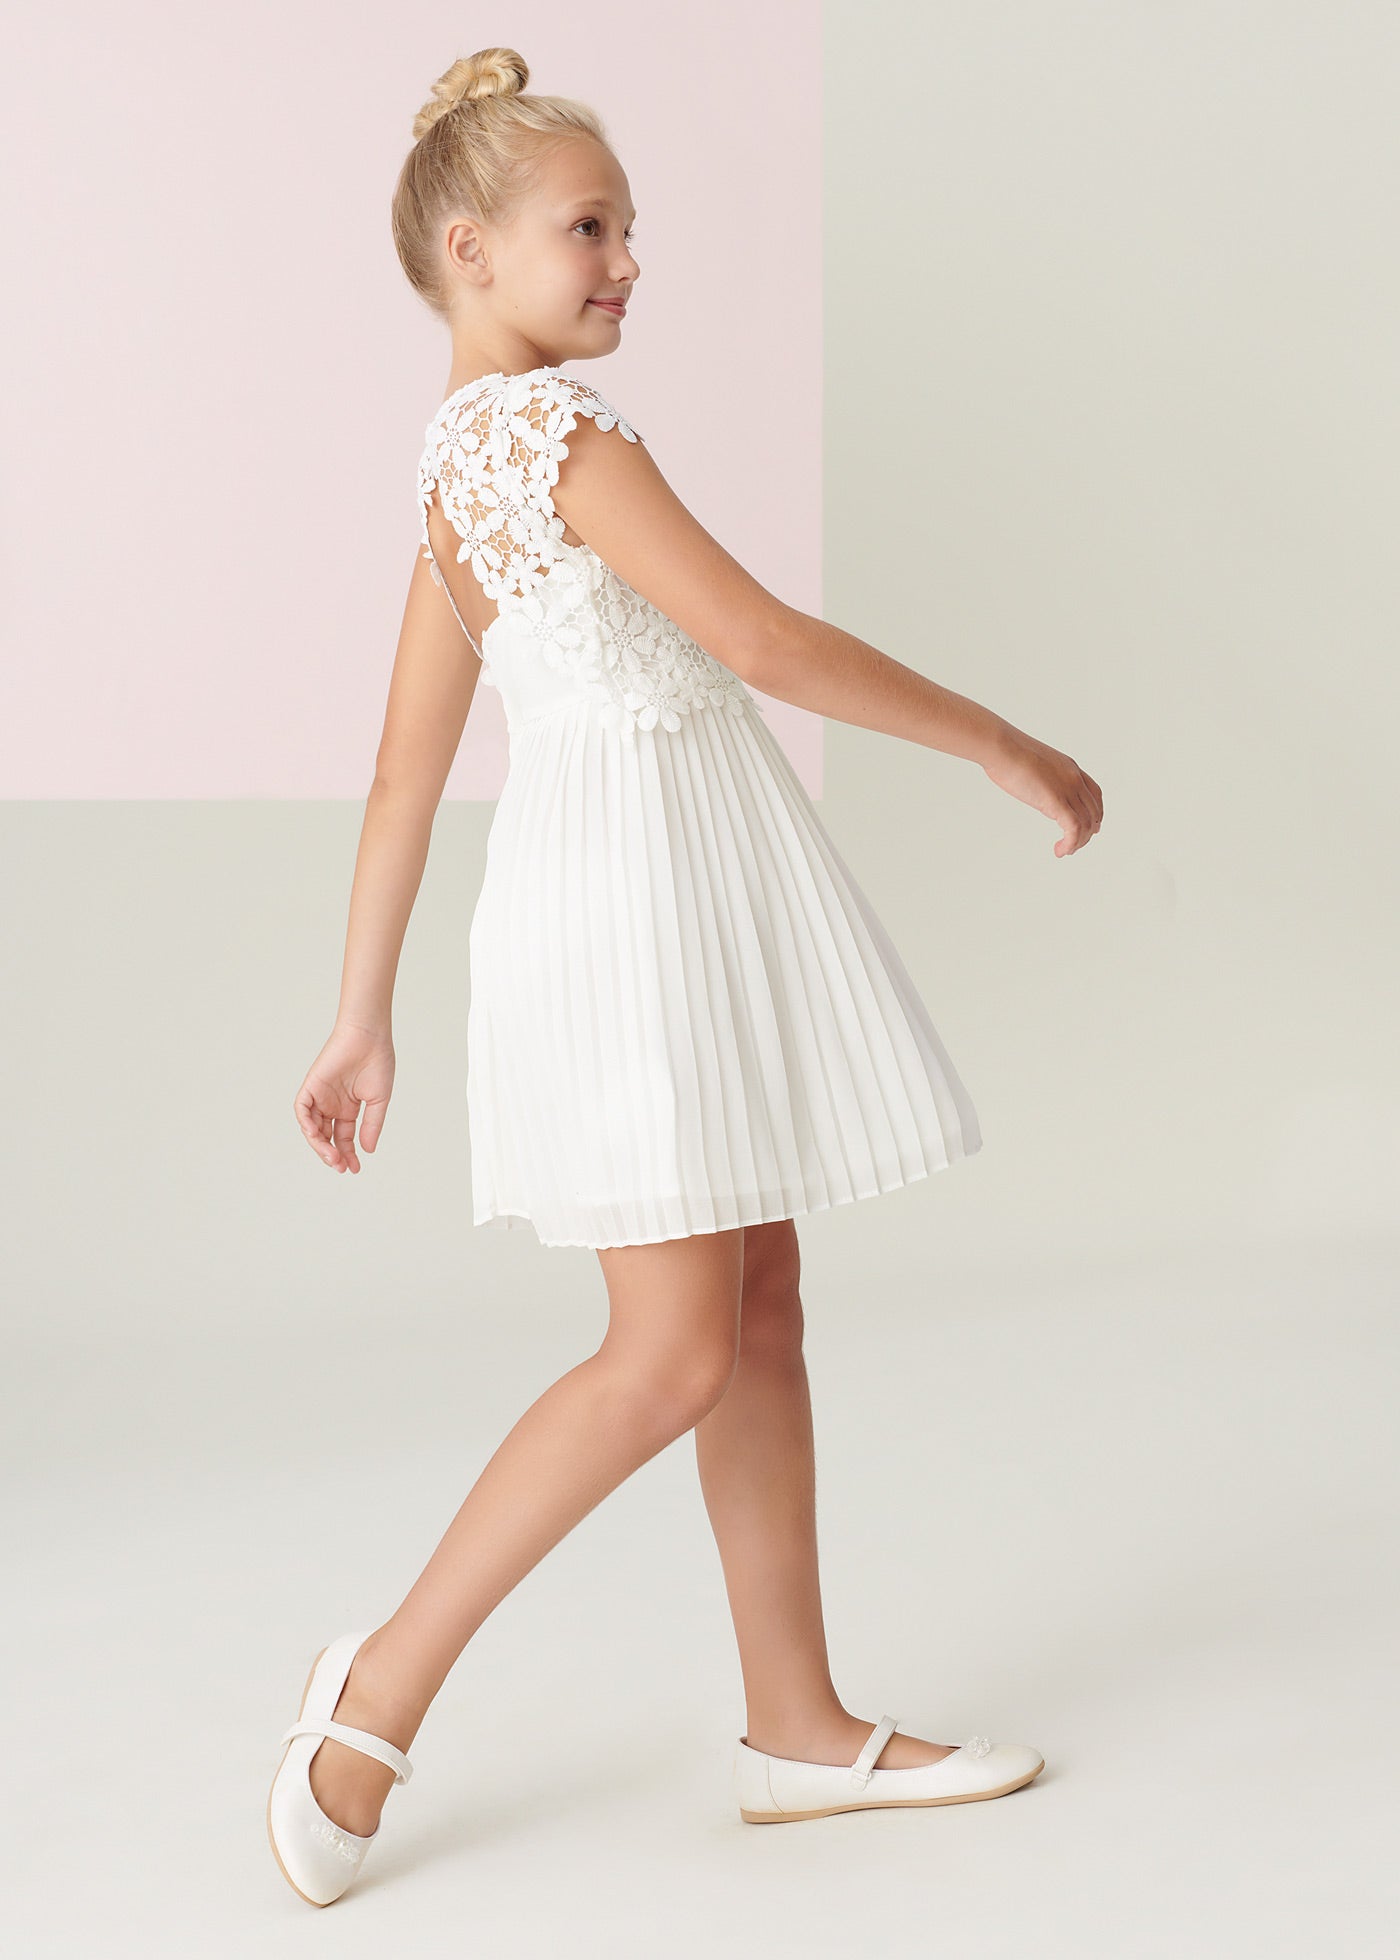 Mayoral Junior S/S Dress w/Lace Overlay & Pleated Skirt _Off White 6916-078